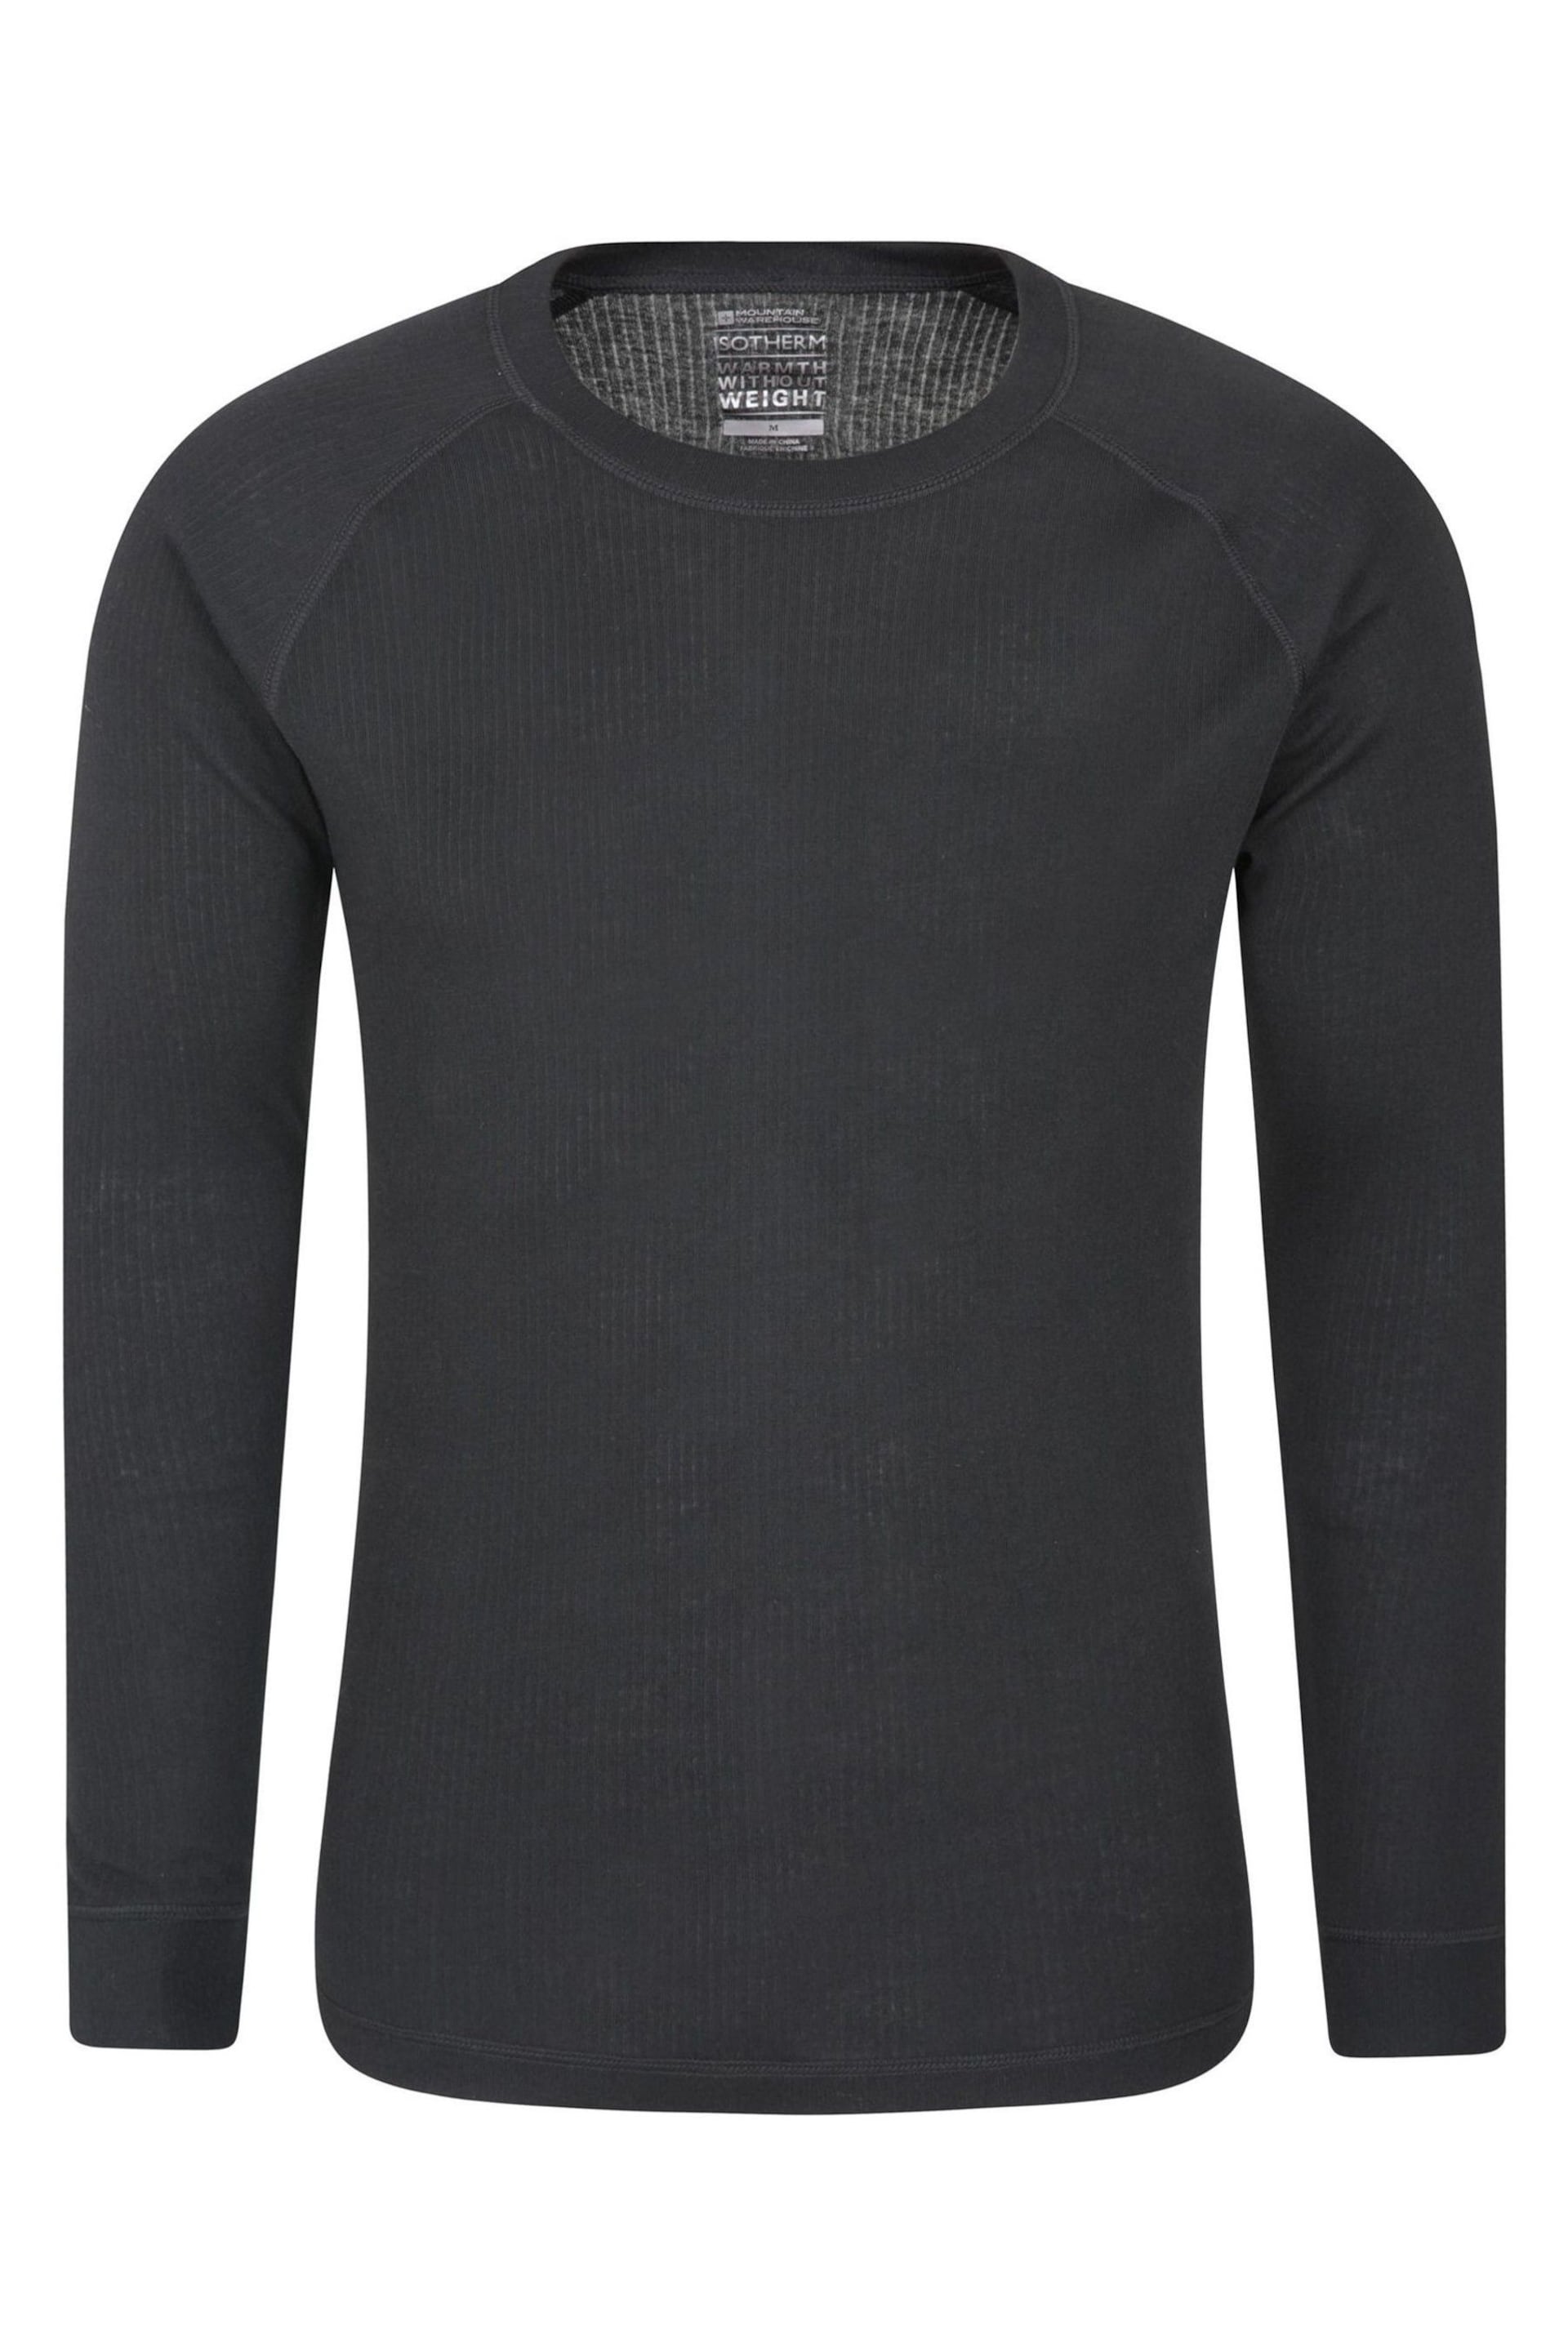 Mountain Warehouse Black Talus Mens Long Sleeved Thermal Top - Image 5 of 5